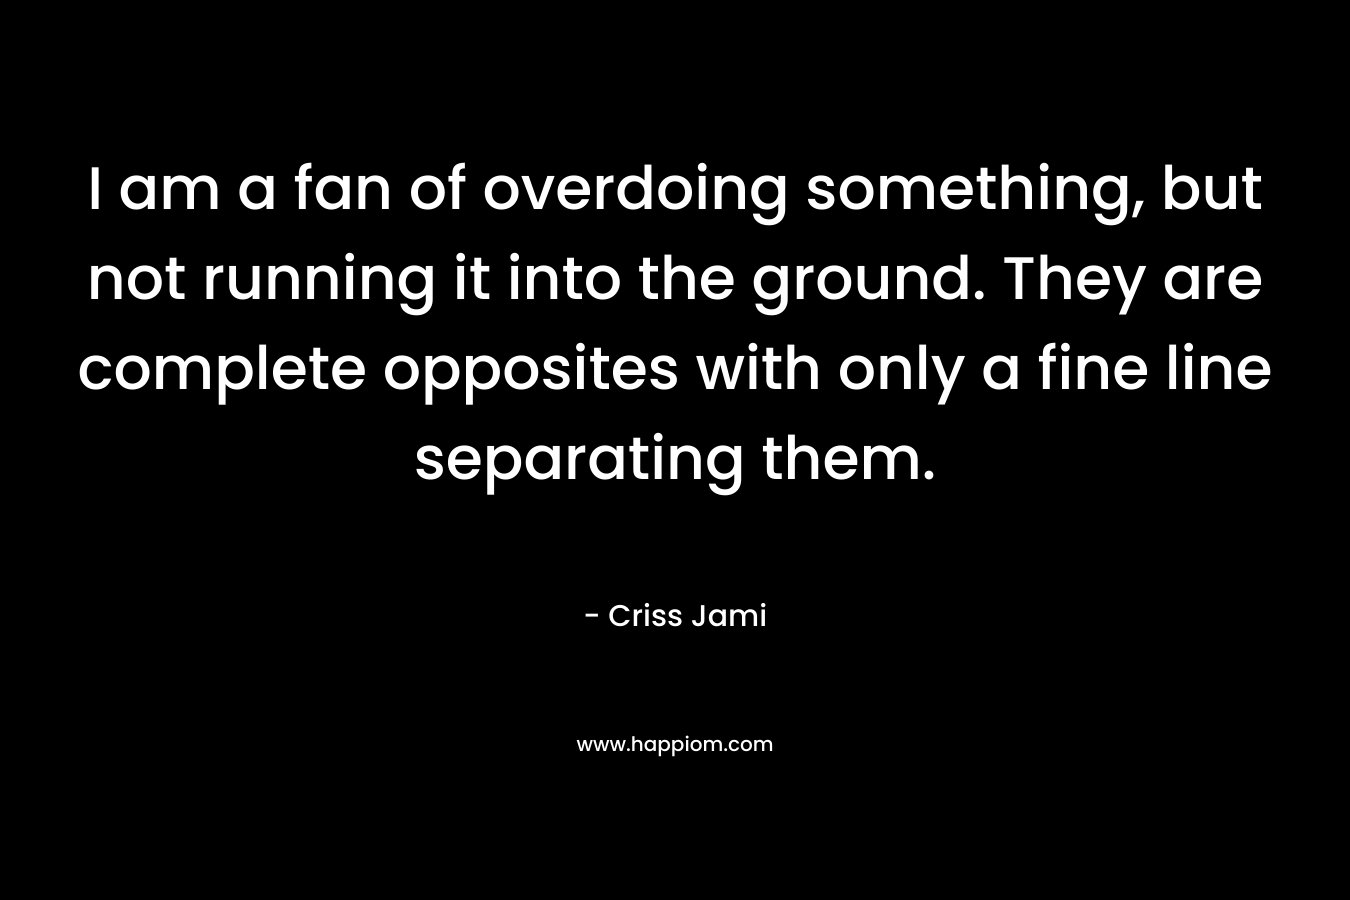 I am a fan of overdoing something, but not running it into the ground. They are complete opposites with only a fine line separating them. – Criss Jami